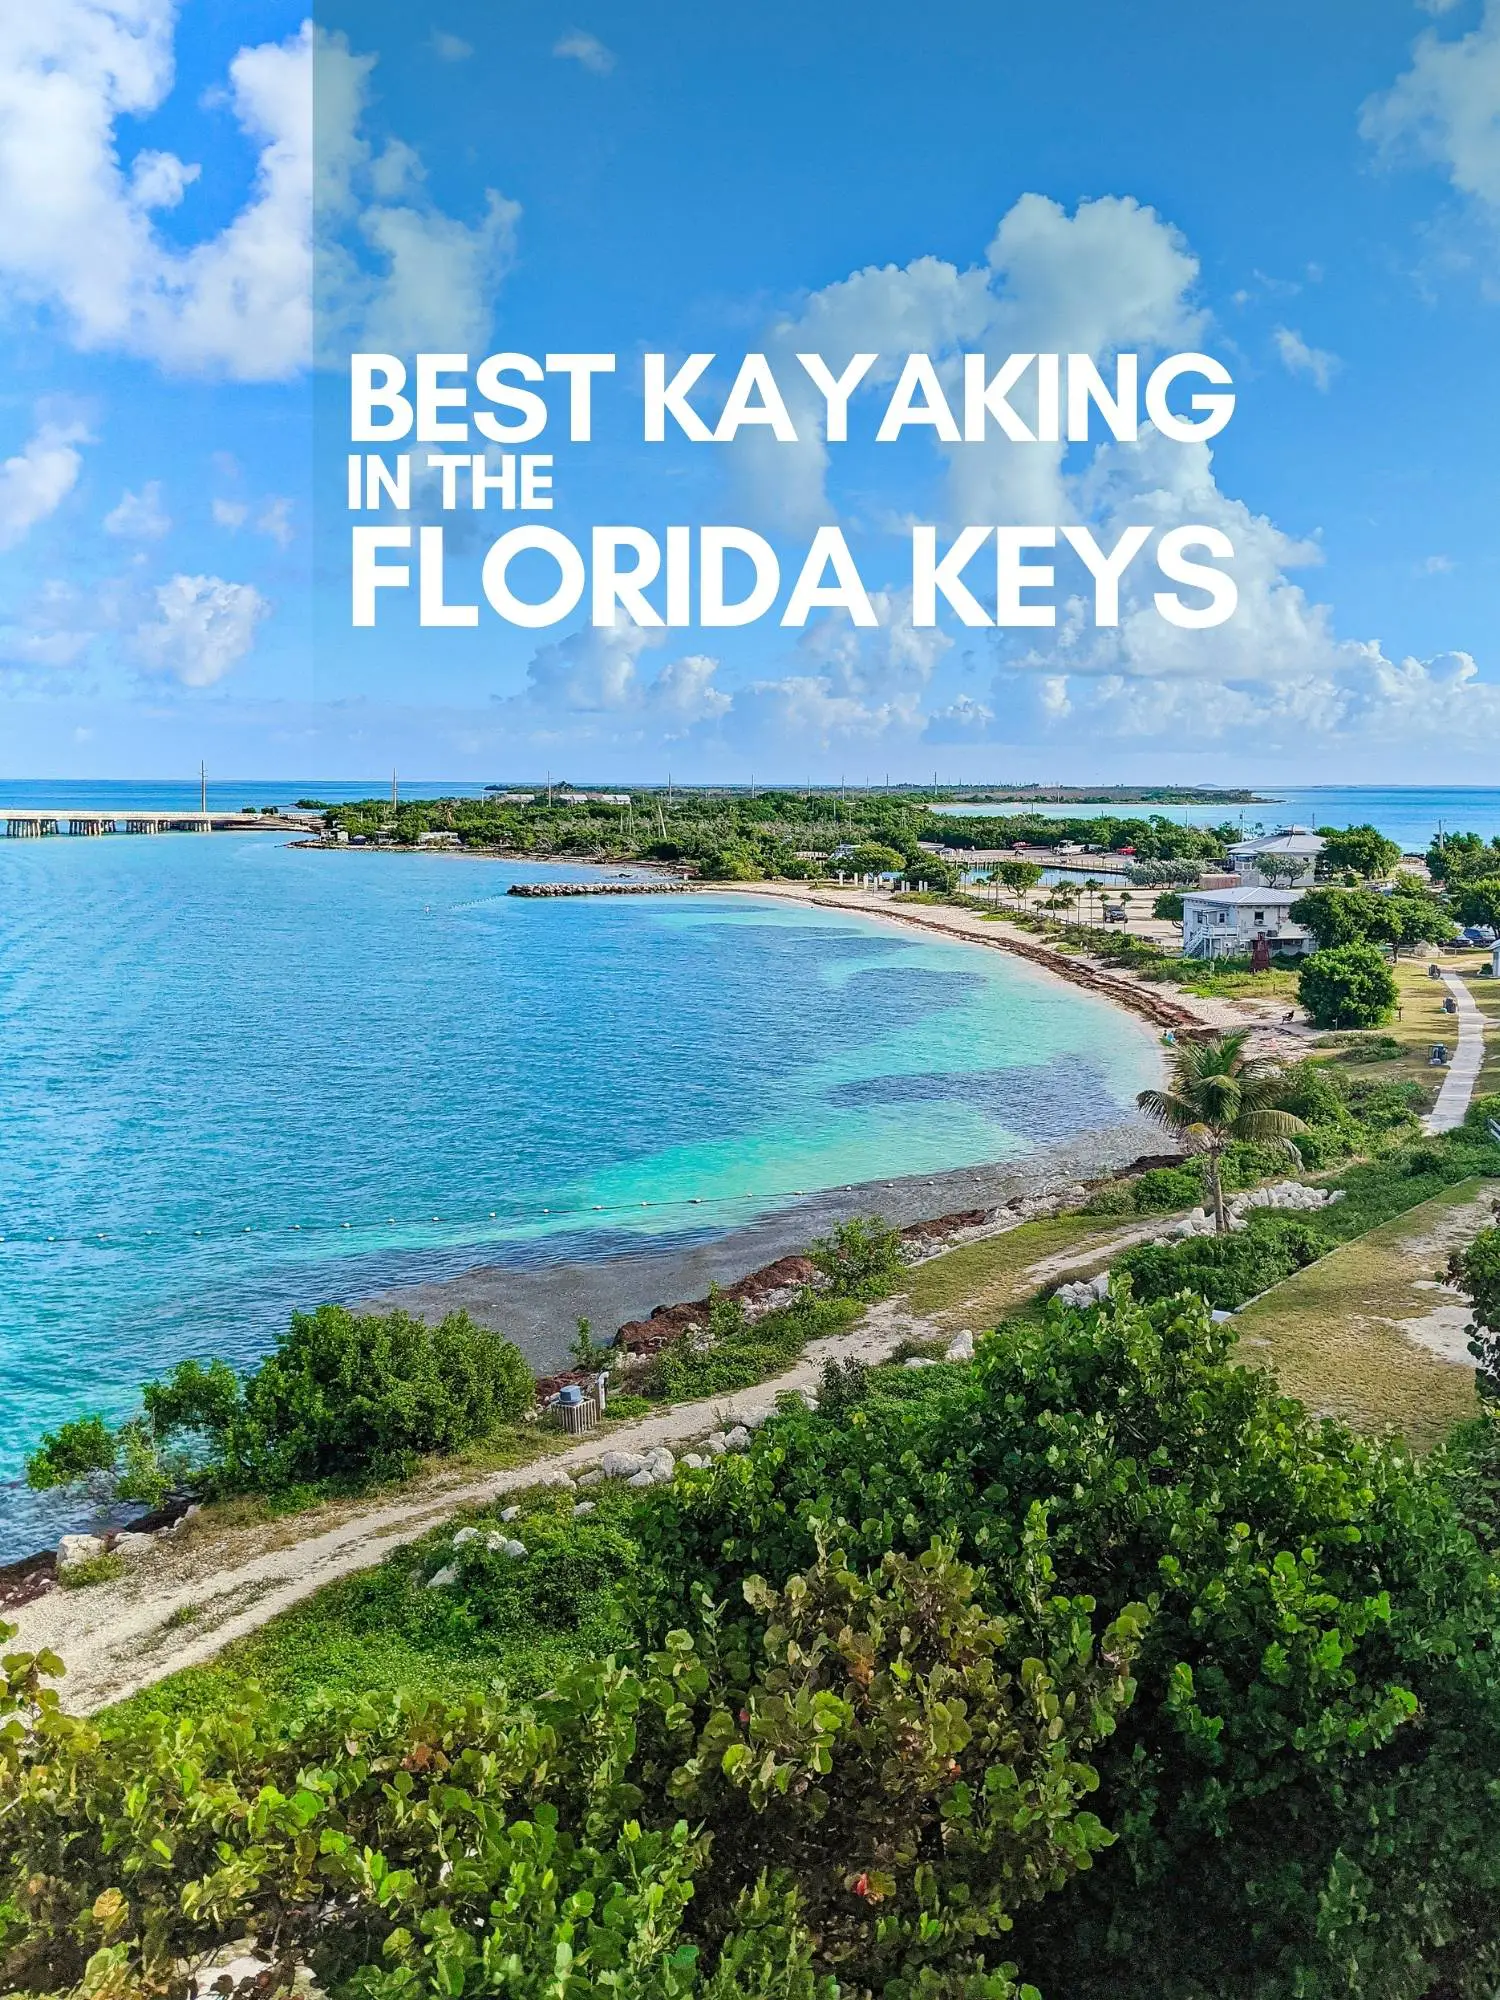 Kayaking in the Florida Keys is beautiful and unique, a once in a lifetime paddling opportunity. Best places to kayak from Key West to Key Largo, launch sites, paddling routes and wildlife viewing.